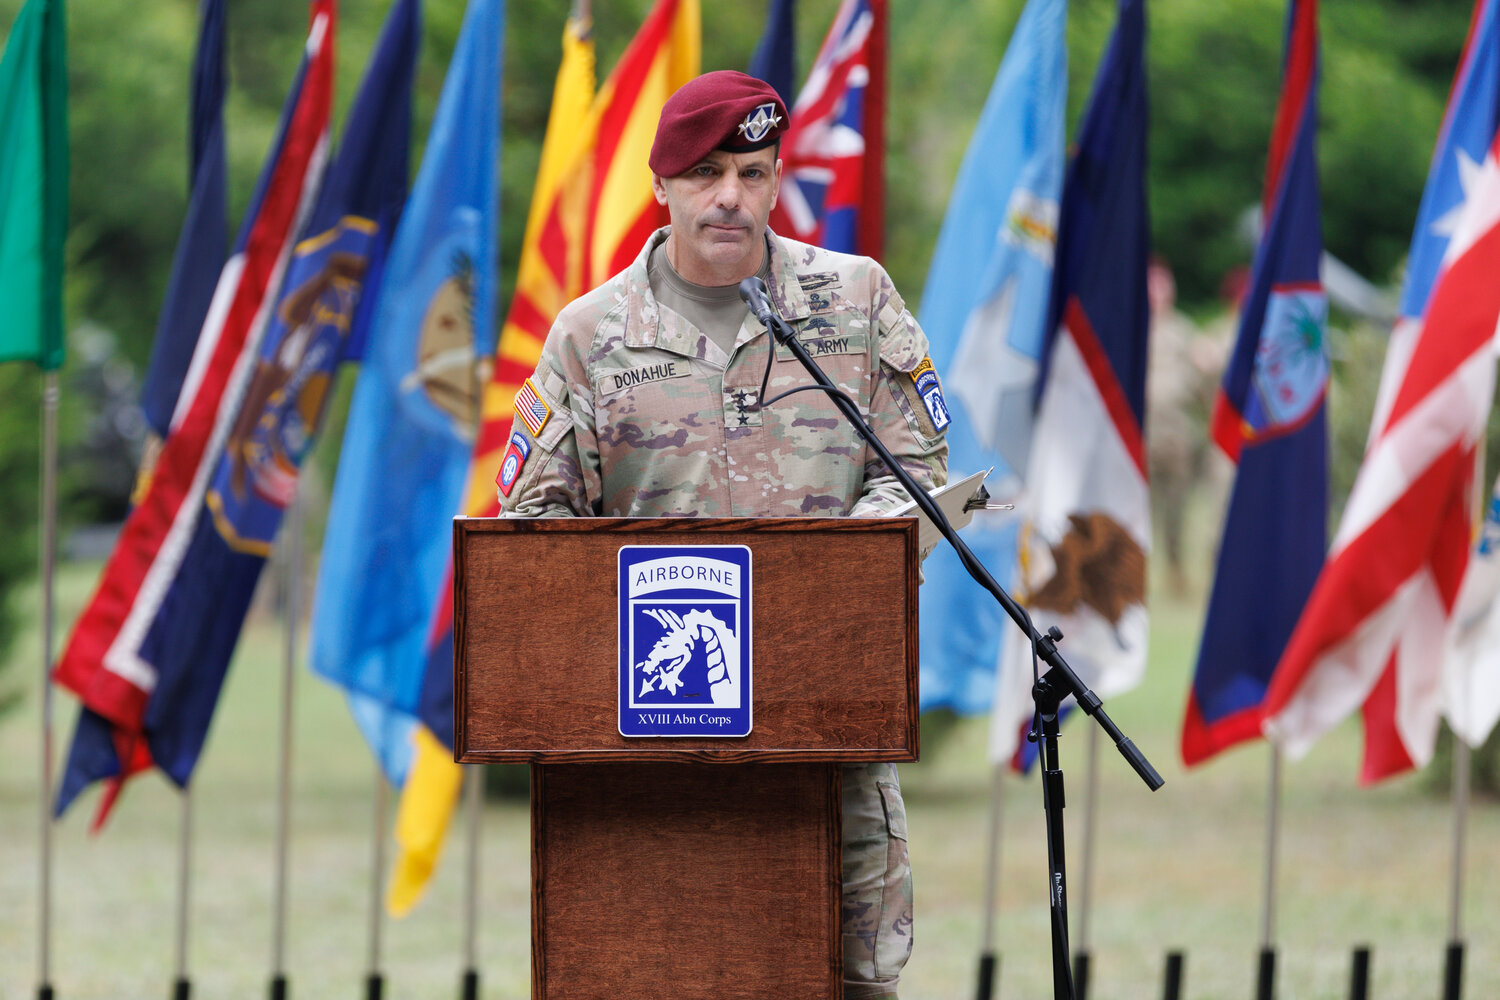 Lt. Gen. Christopher Donahue, commander of the 18th Airborne Corps, addresses the audience during the Fort Liberty redesignation ceremony.